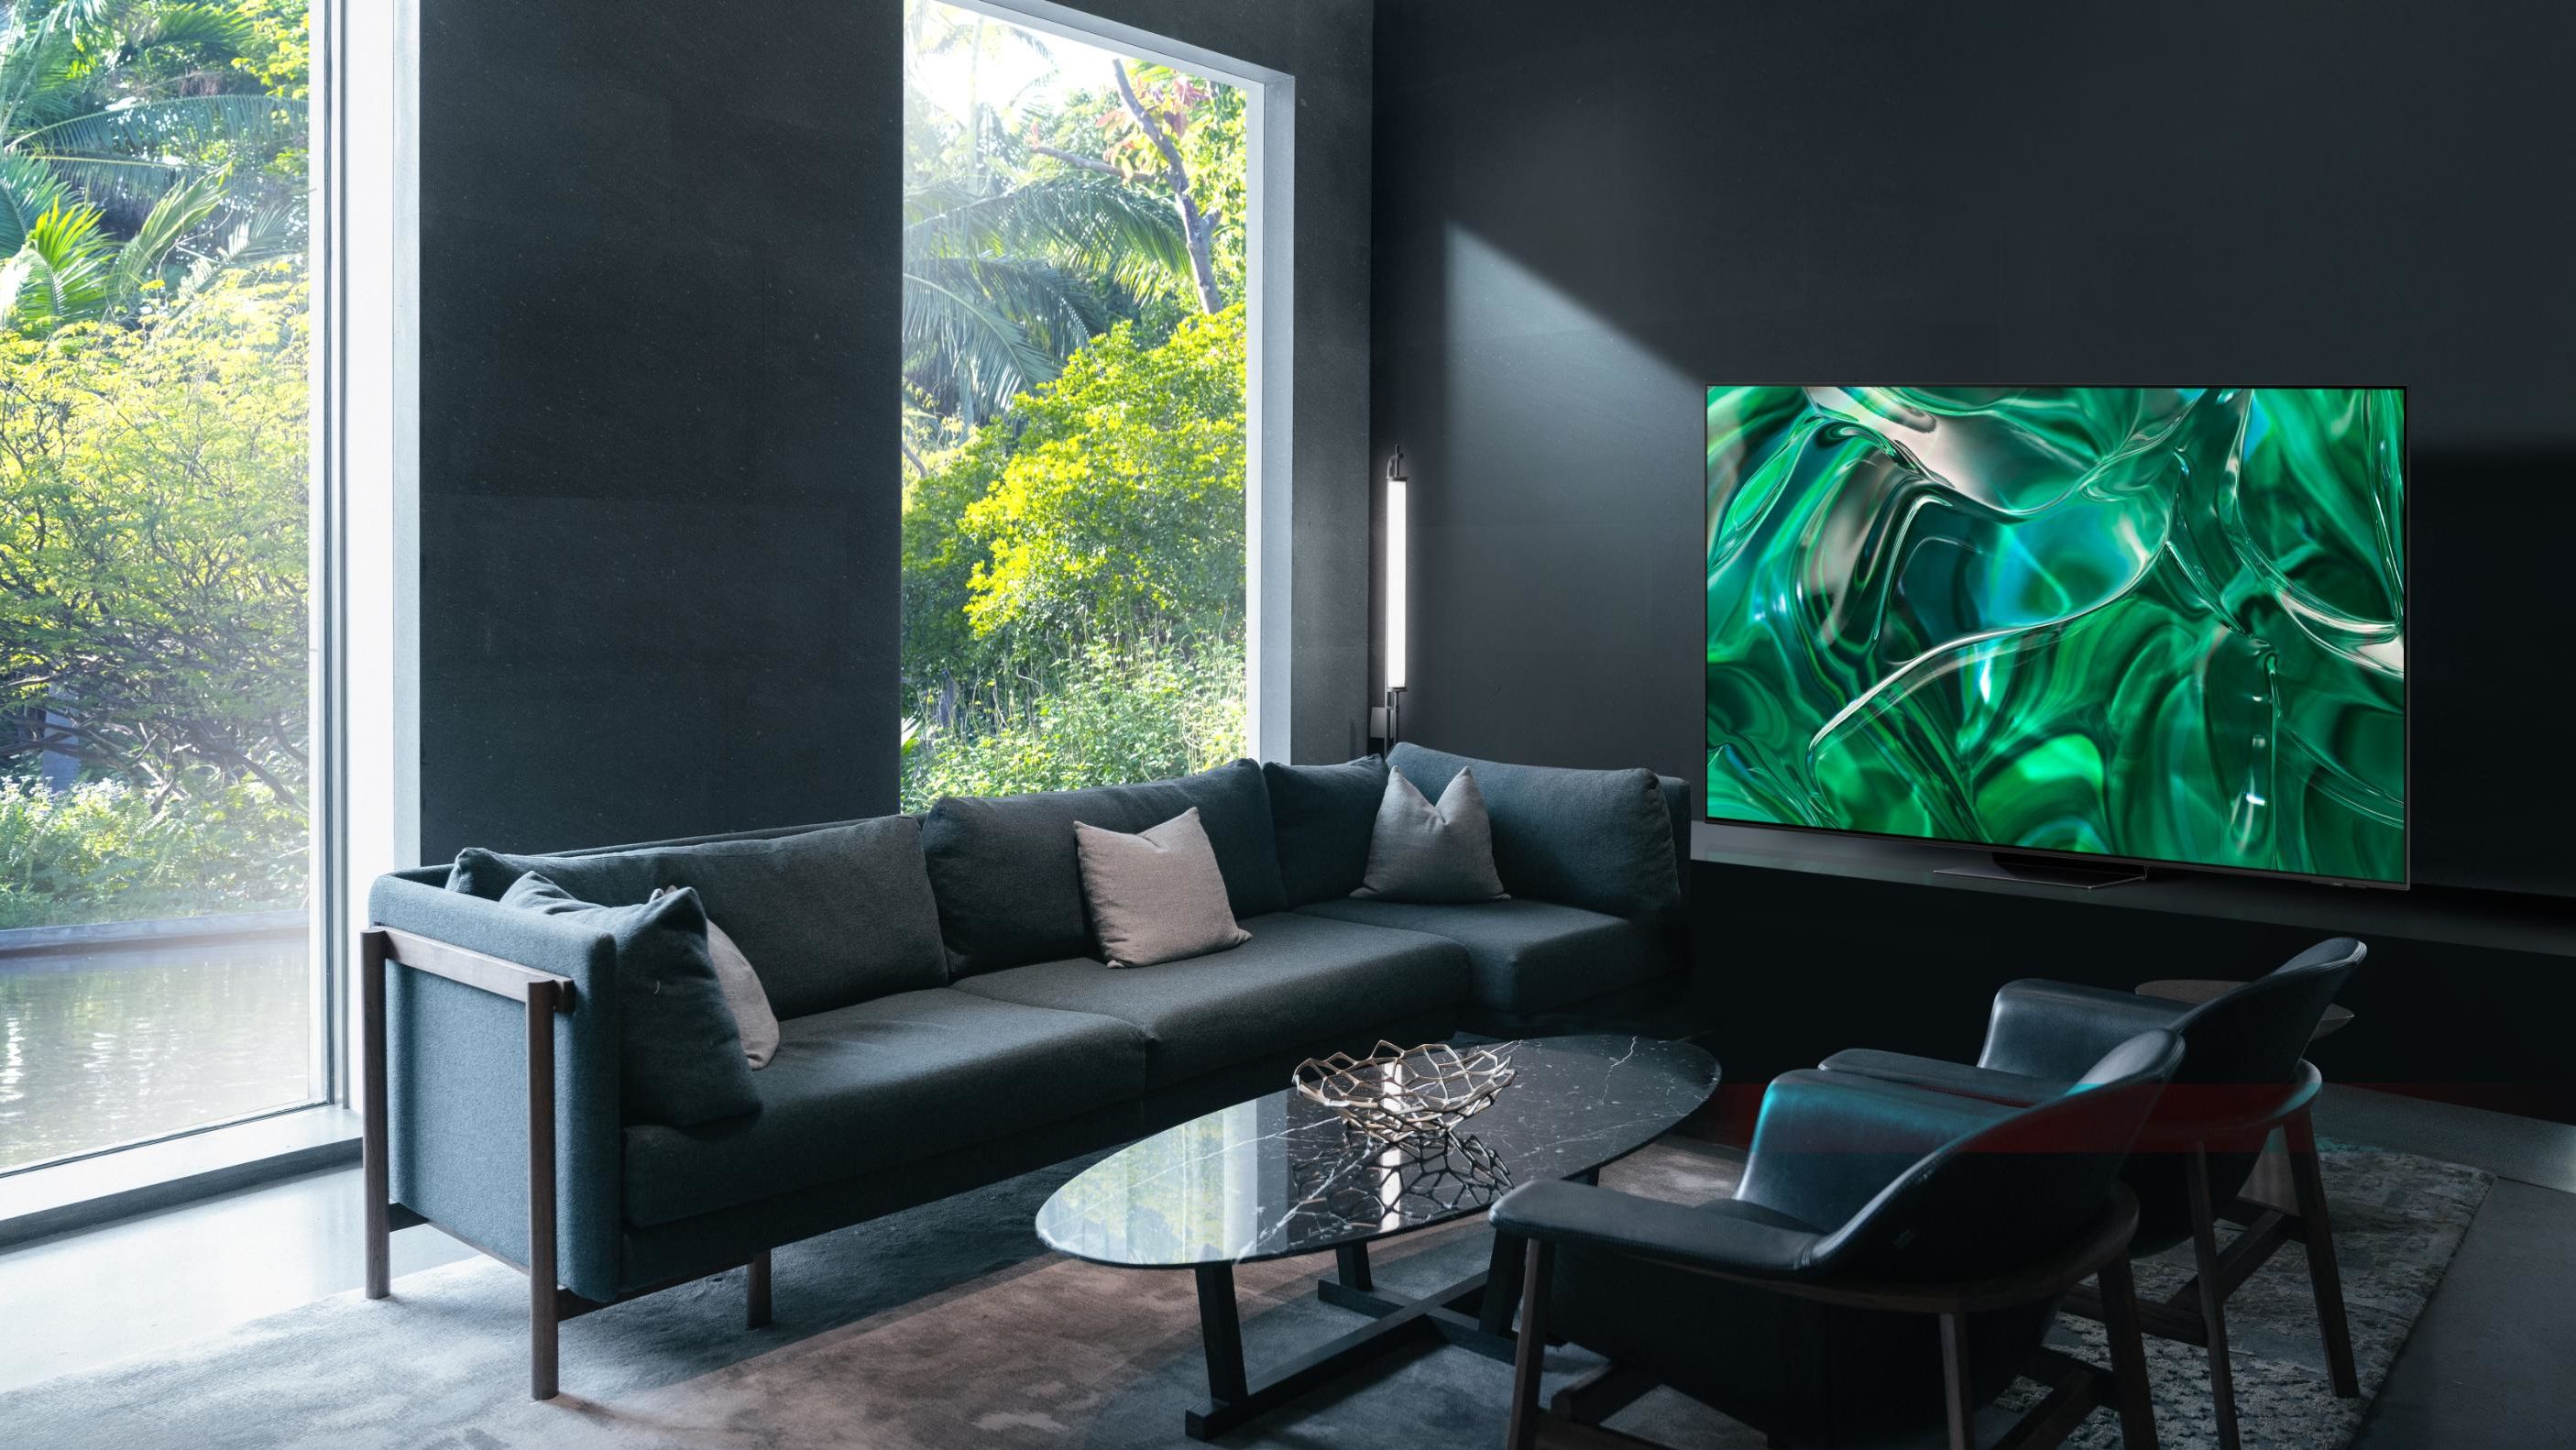 QD-OLED TV: Samsung, Sony Take on LG With Quantum Dot Special